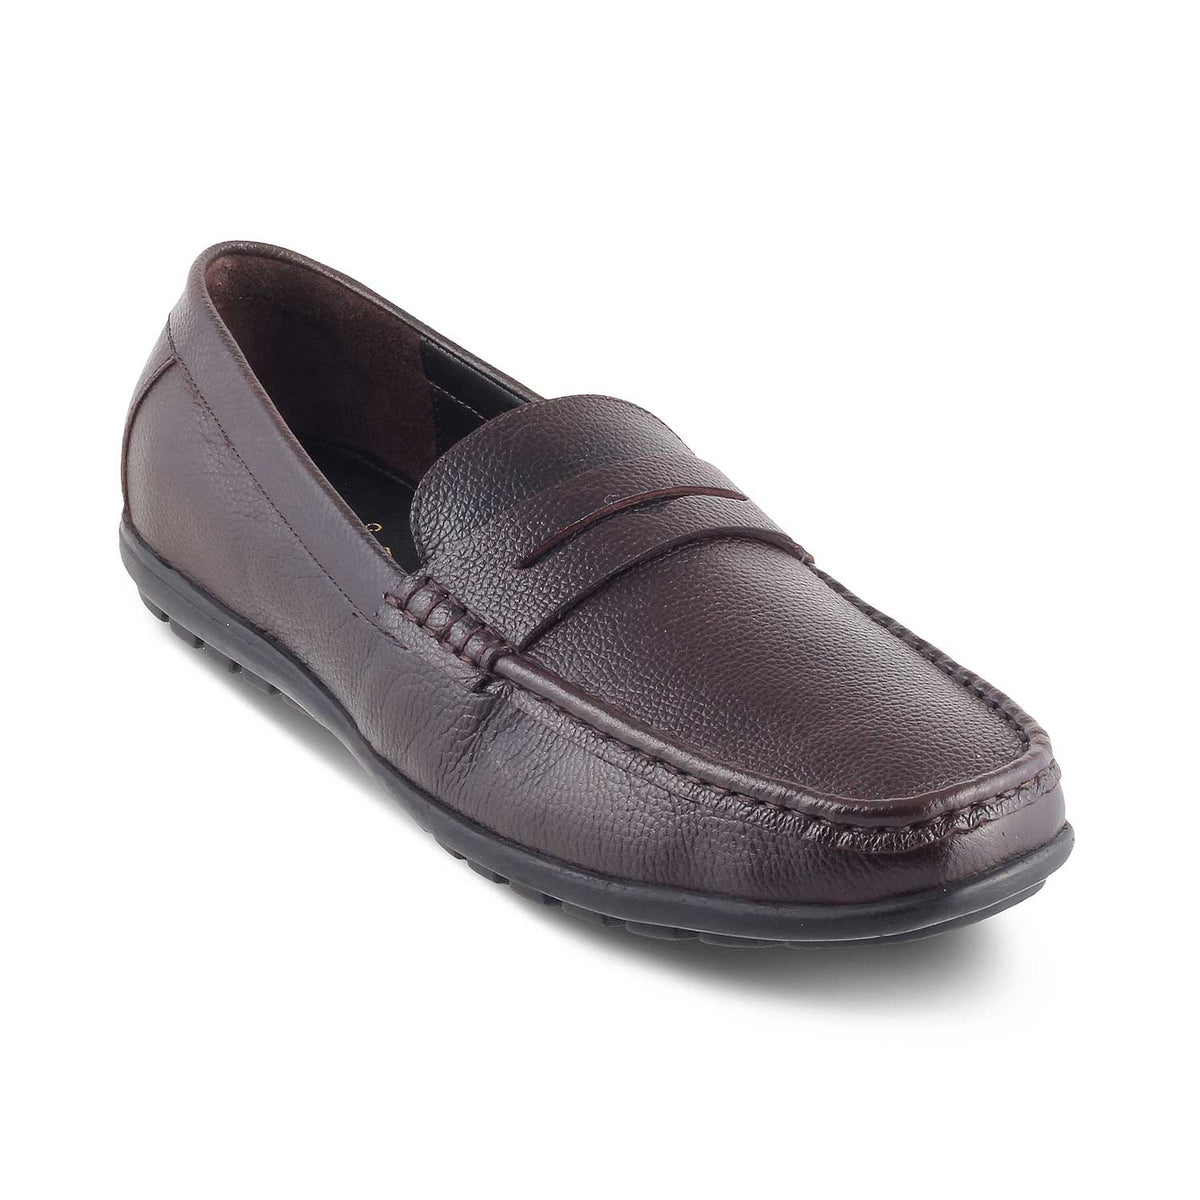 The Lemec Brown Men's Leather Penny Loafers Tresmode